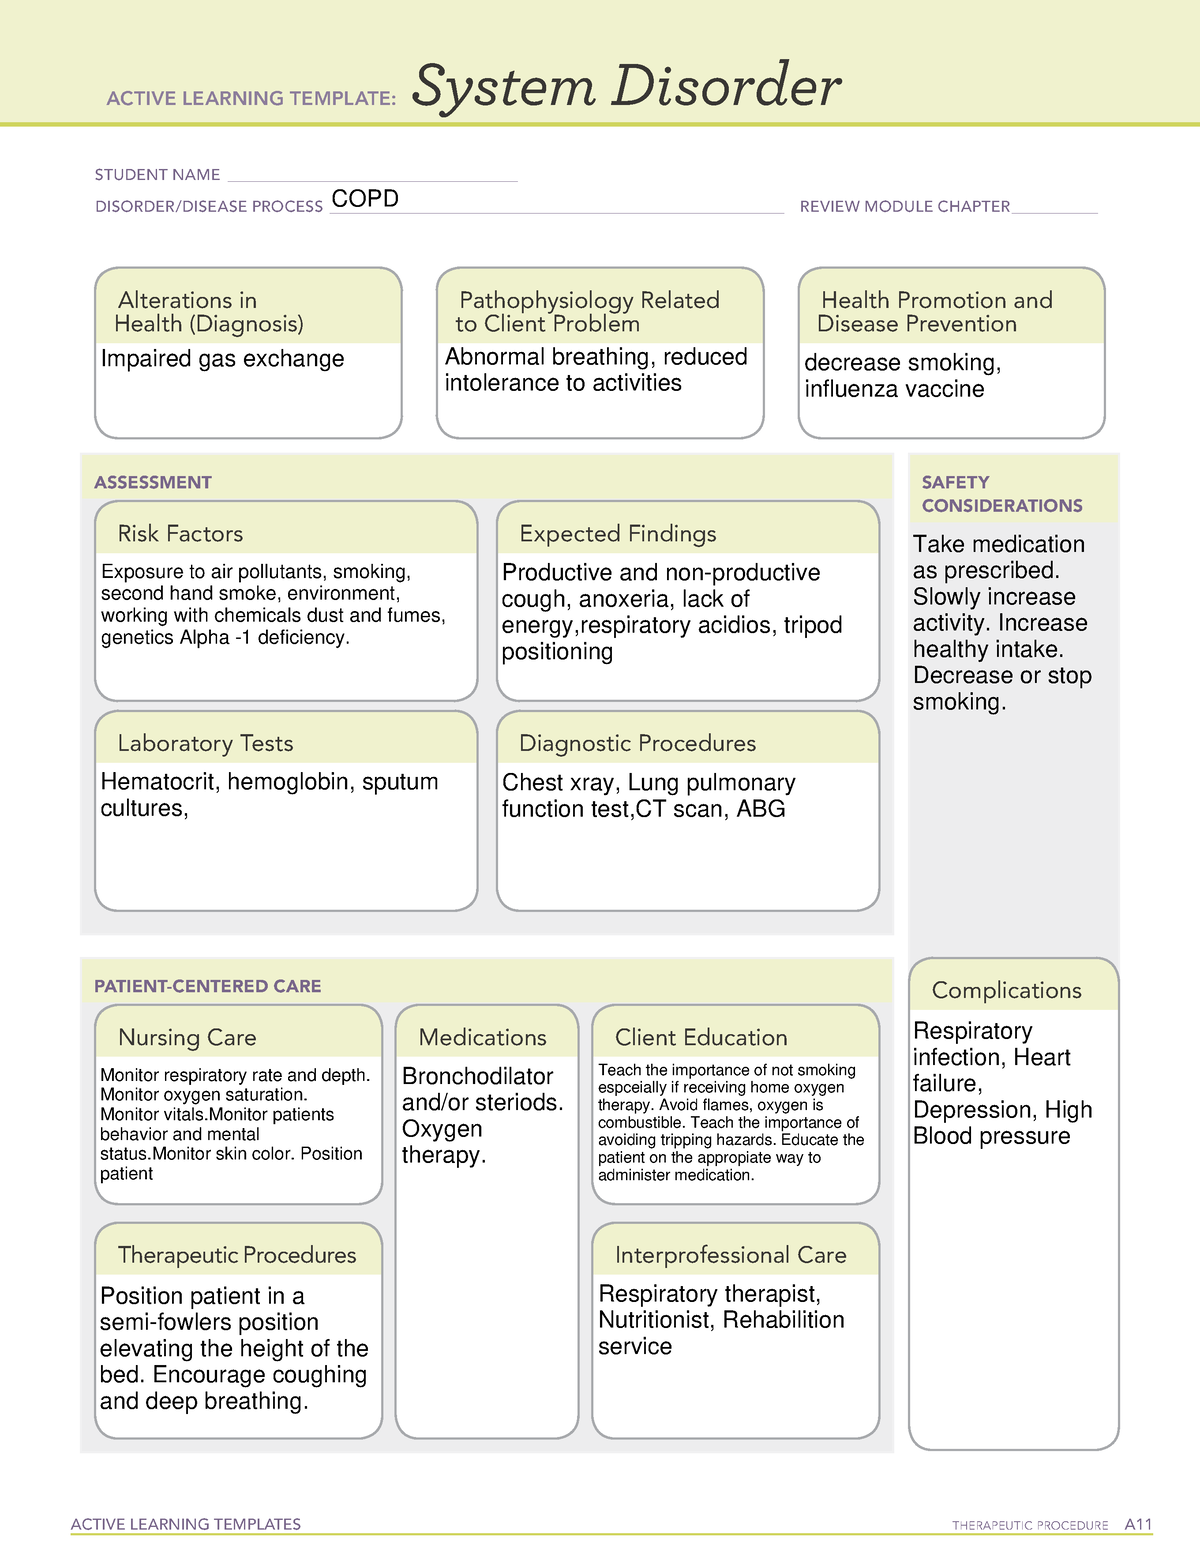 COPDActive Learning Template nurs326 medical surgical nursing